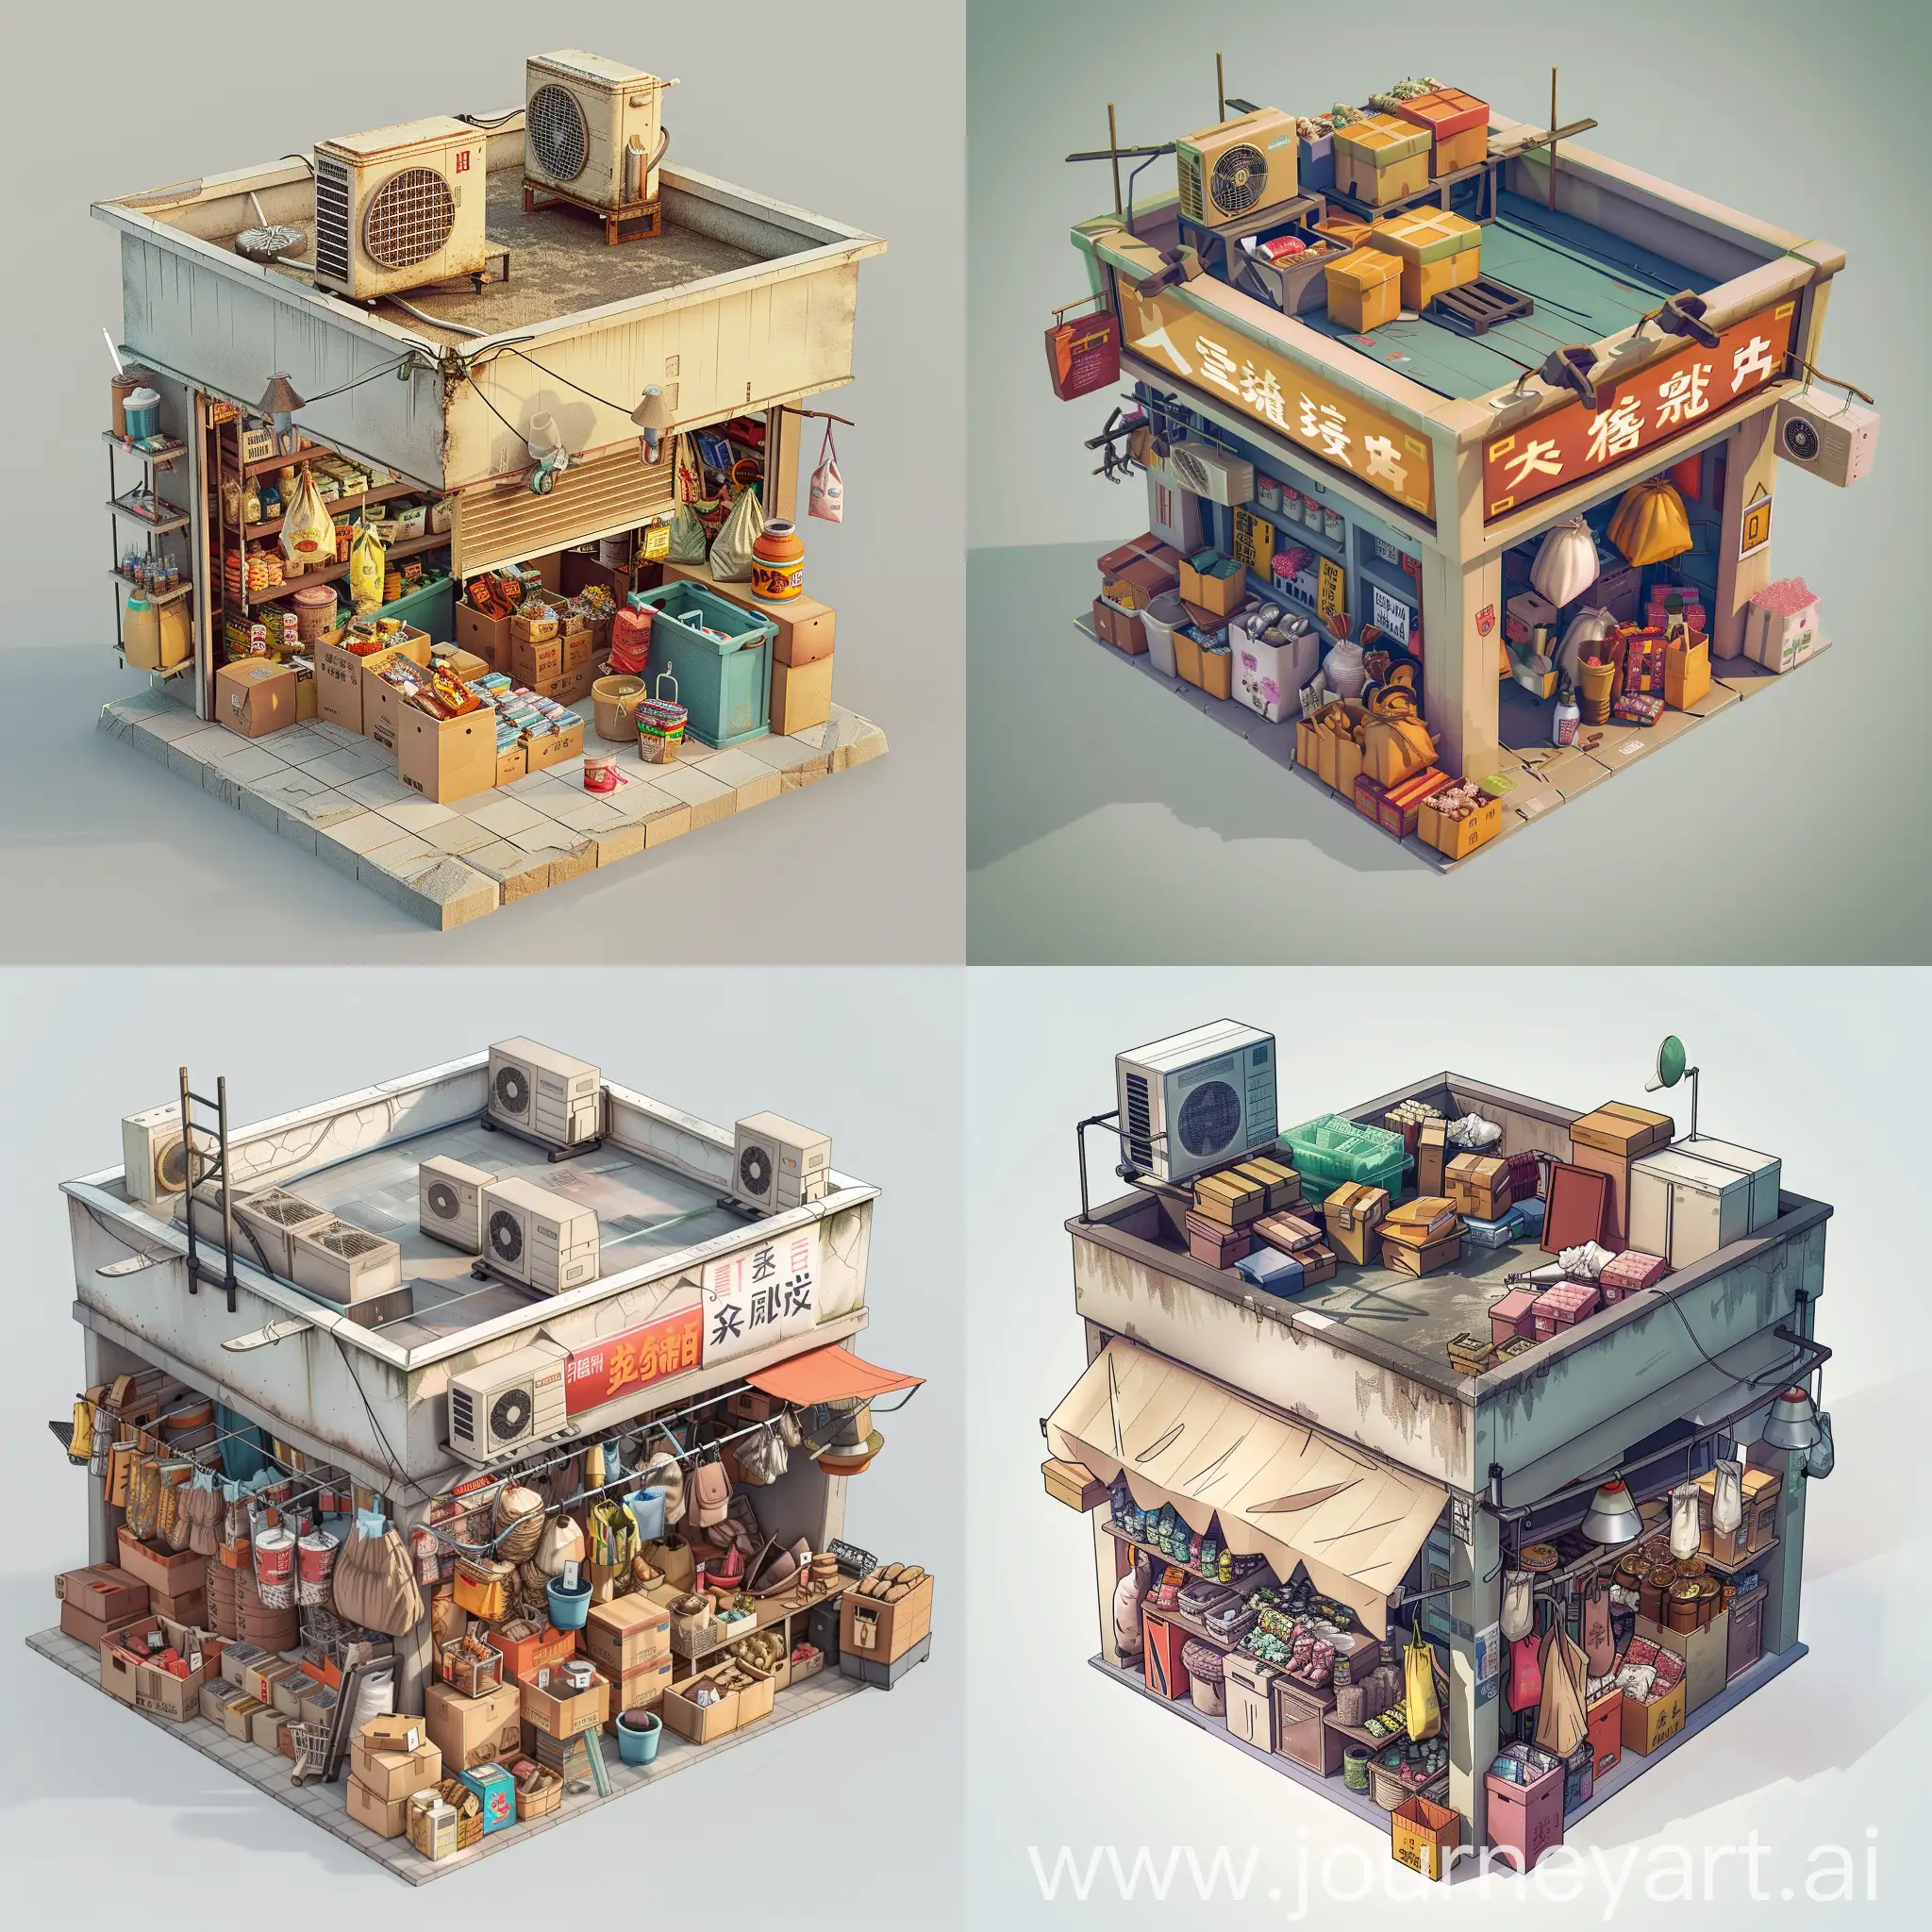 A small, Cluttered junk shop store front at Hong kong. Various goods are displayed, including boxes, bags, and hanging items. cartoon, 3d, isometric in 30 degrees, game style on blank background. The roof top should have air conditioner system. The model should be appropriate with a cube shape, quality in 4k and high detailed